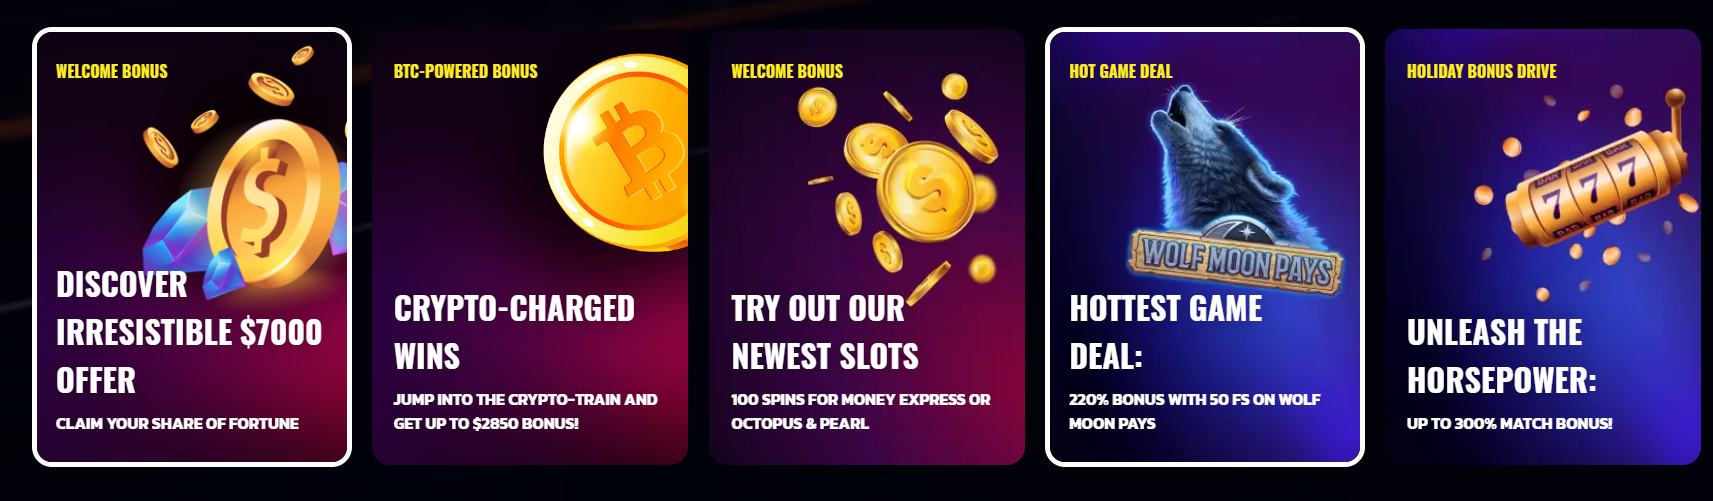 Play with Highway Online Casino Promotions 2023 2